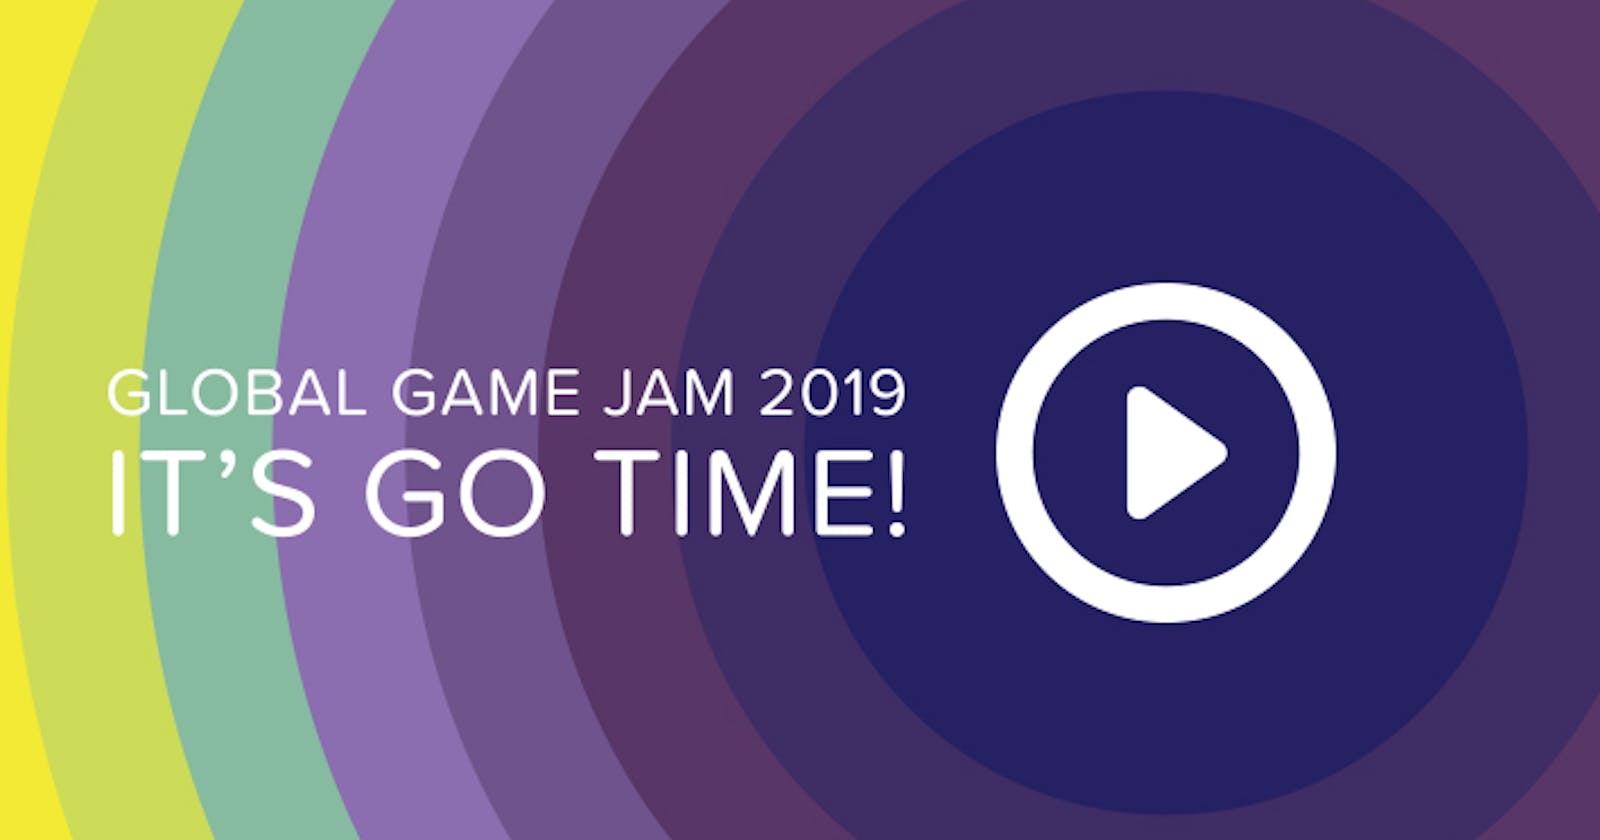 Global Game Jam @ 2019 January 25 - 27 with Friends